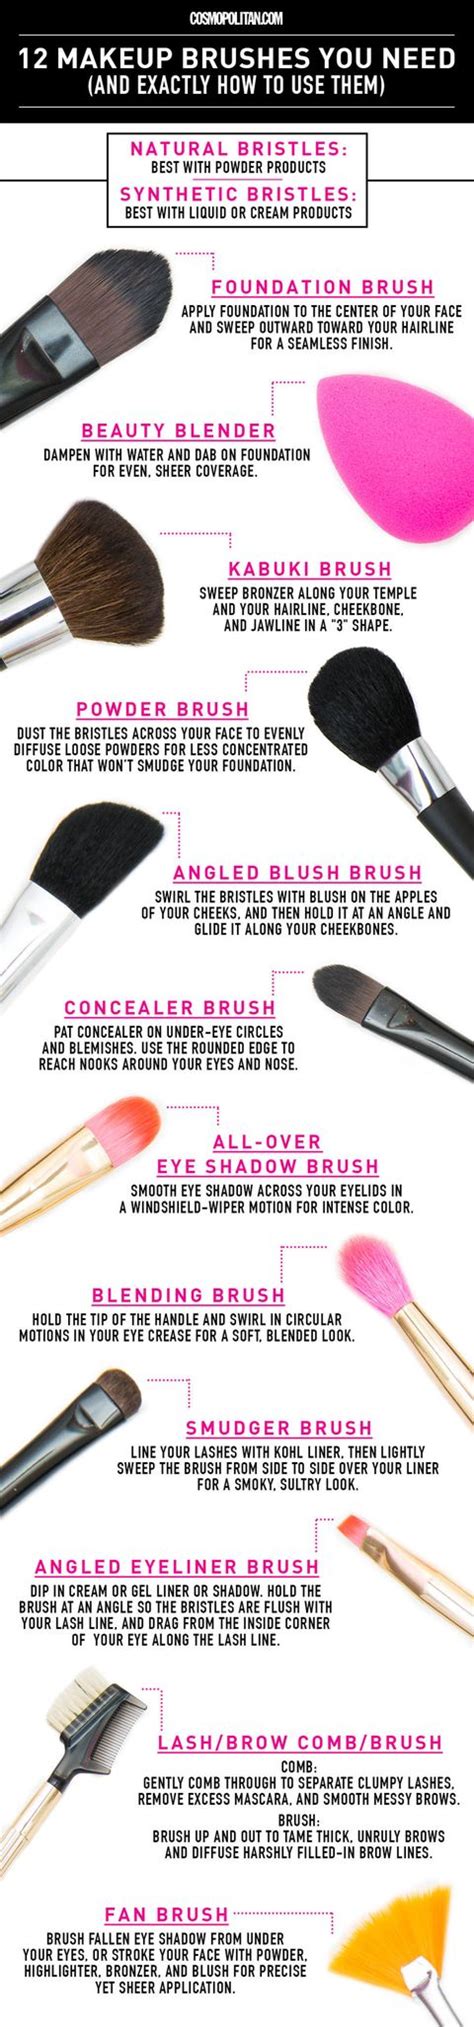 12 Makeup Brushes You Need And How To Use Them Build Your Own Makeup